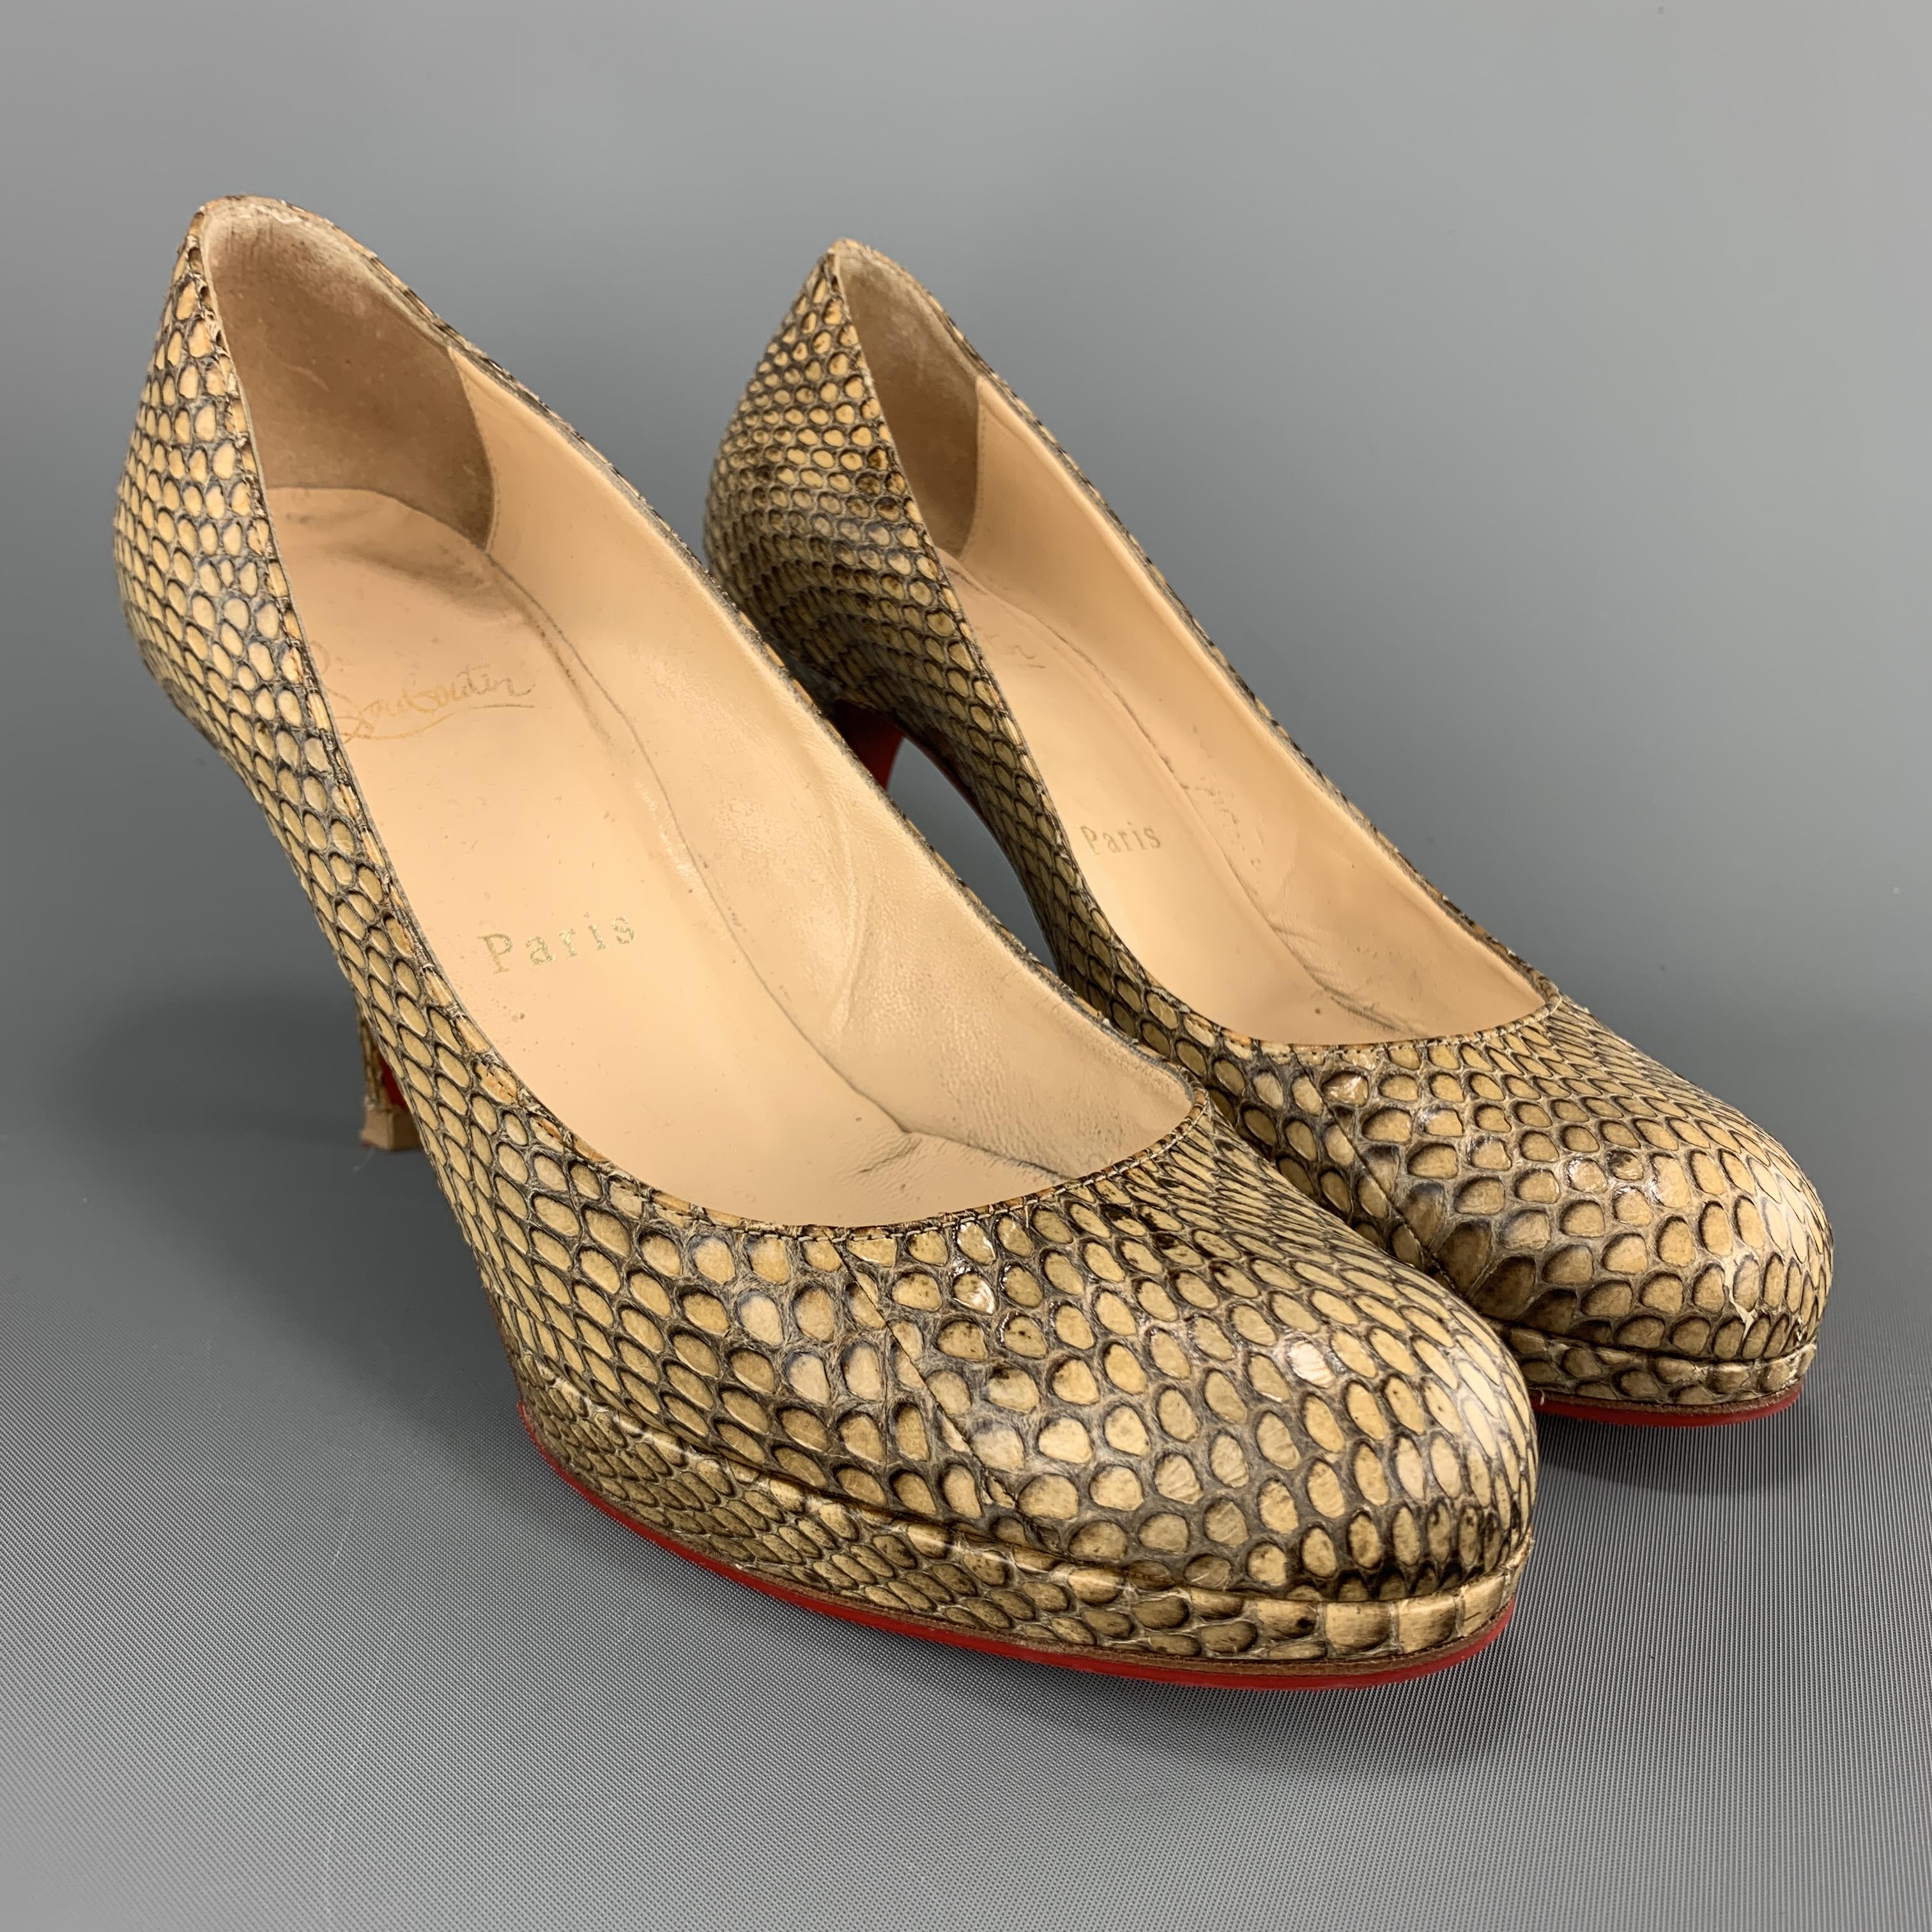 CHRISTIAN LOUBOUTIN pumps come in snakeskin with platform and covered heel. Made in Italy.

Very Good Pre-Owned Condition.
Marked: IT 36.5 

Measurements:

Heel: 3.5 in.
Platform: 0.5 in.